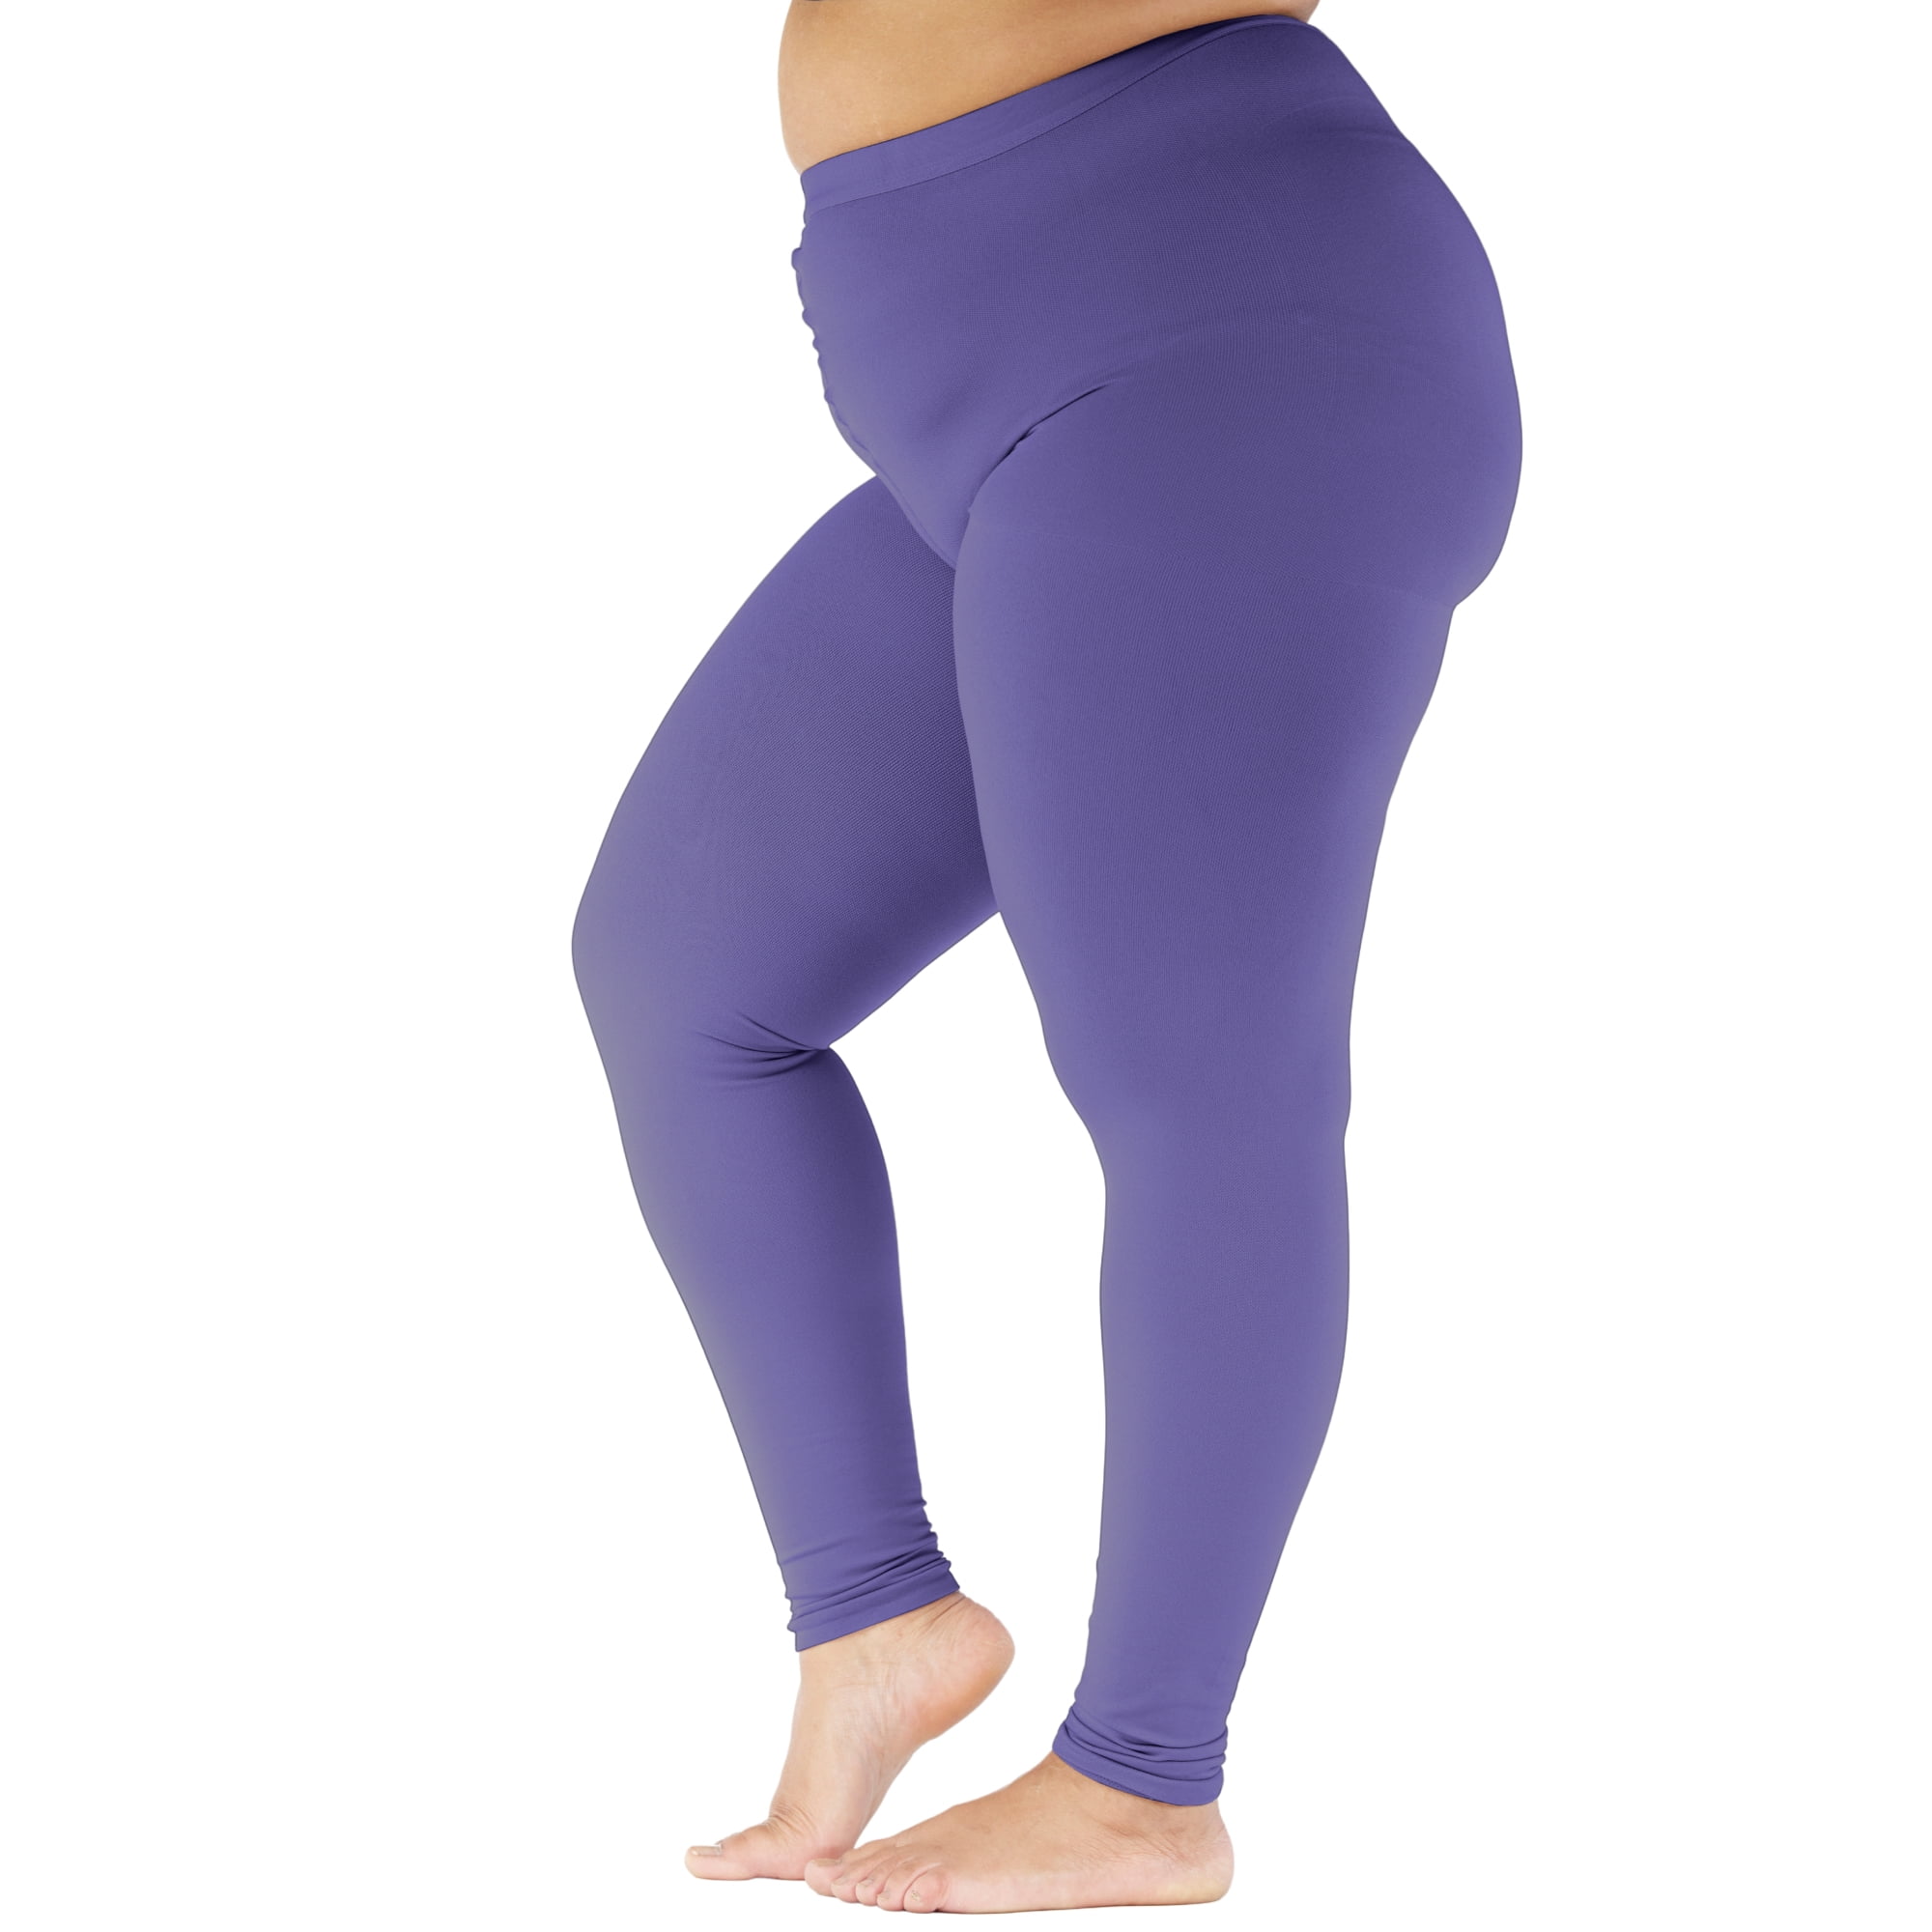 3XL Extra Wide Compression Leggings for Swelling 20-30mmHg - Grey